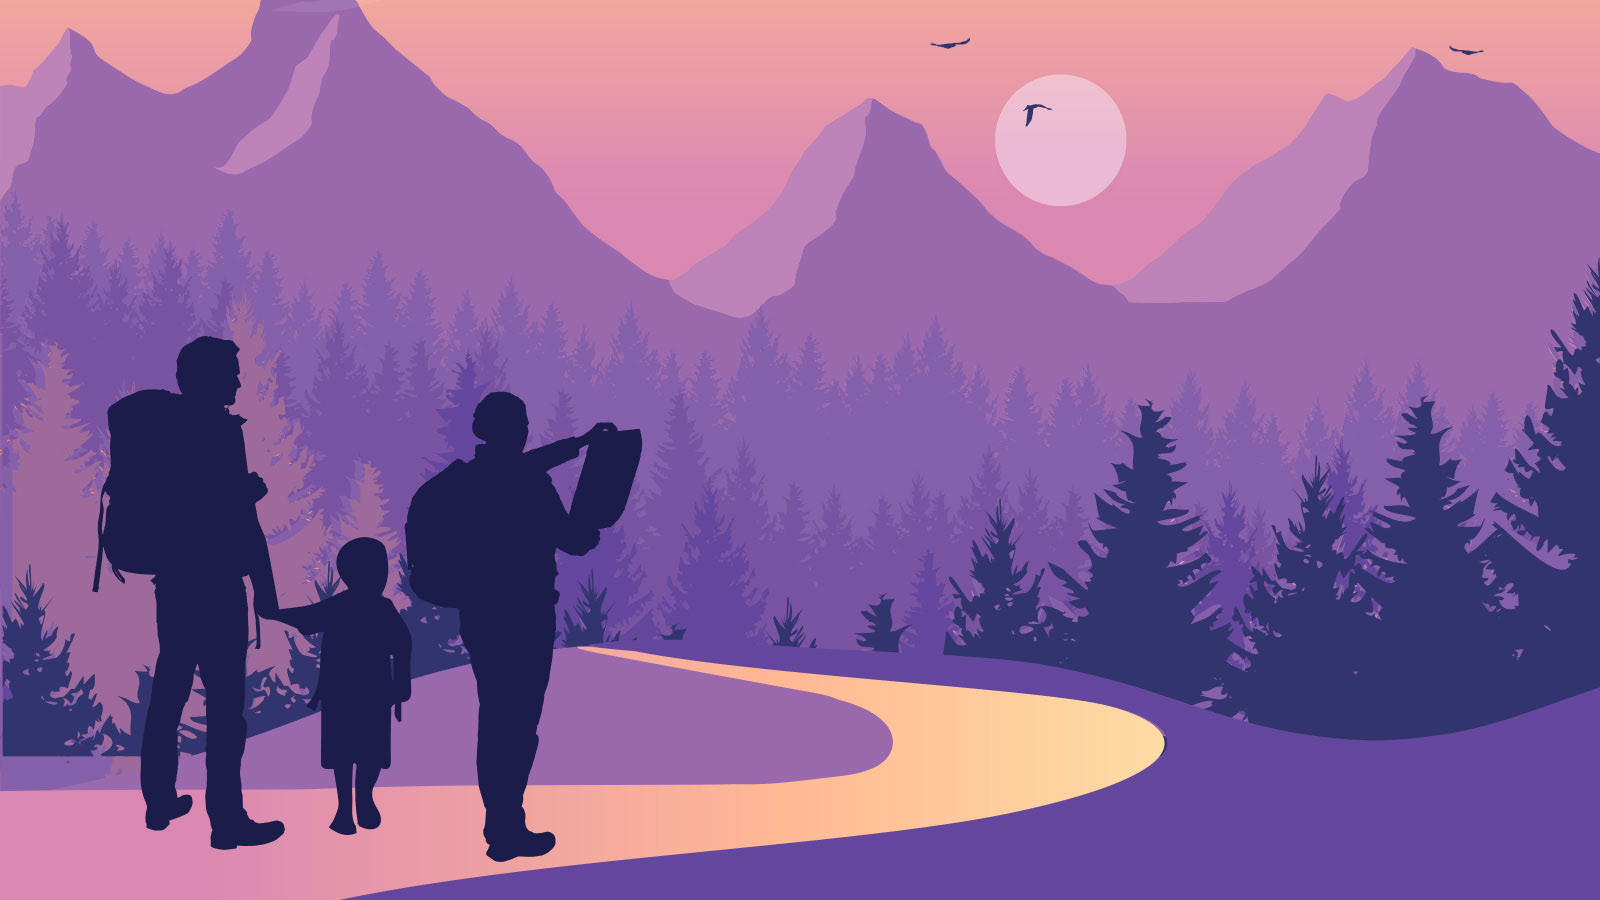 A family silhouetted on an artistic rendition of a mountainous landscape 